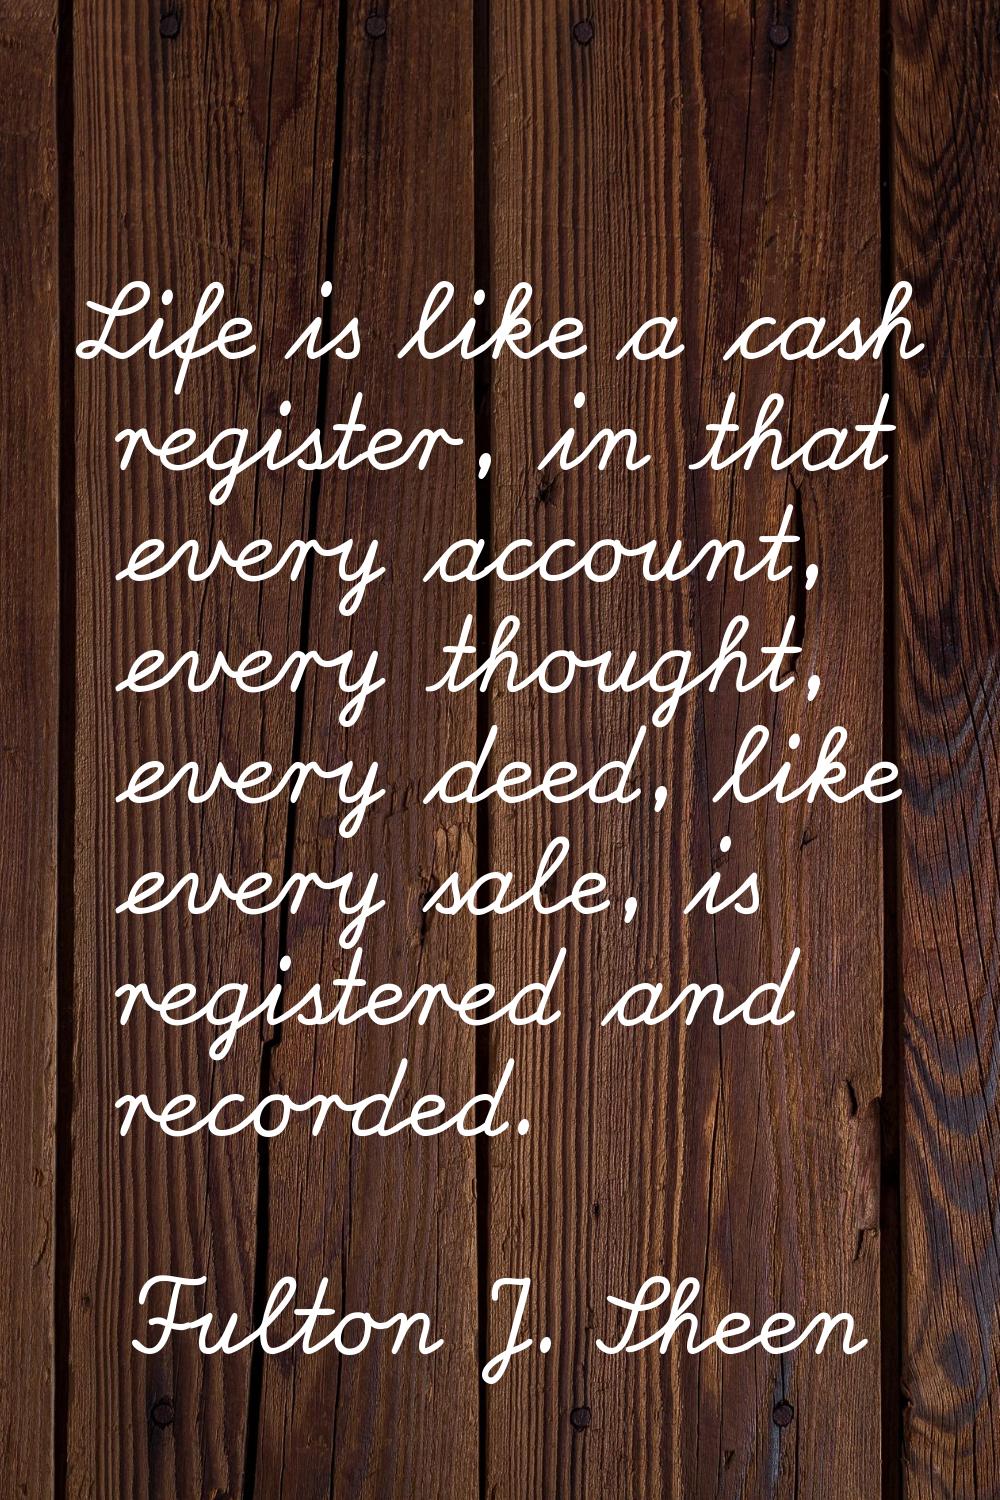 Life is like a cash register, in that every account, every thought, every deed, like every sale, is